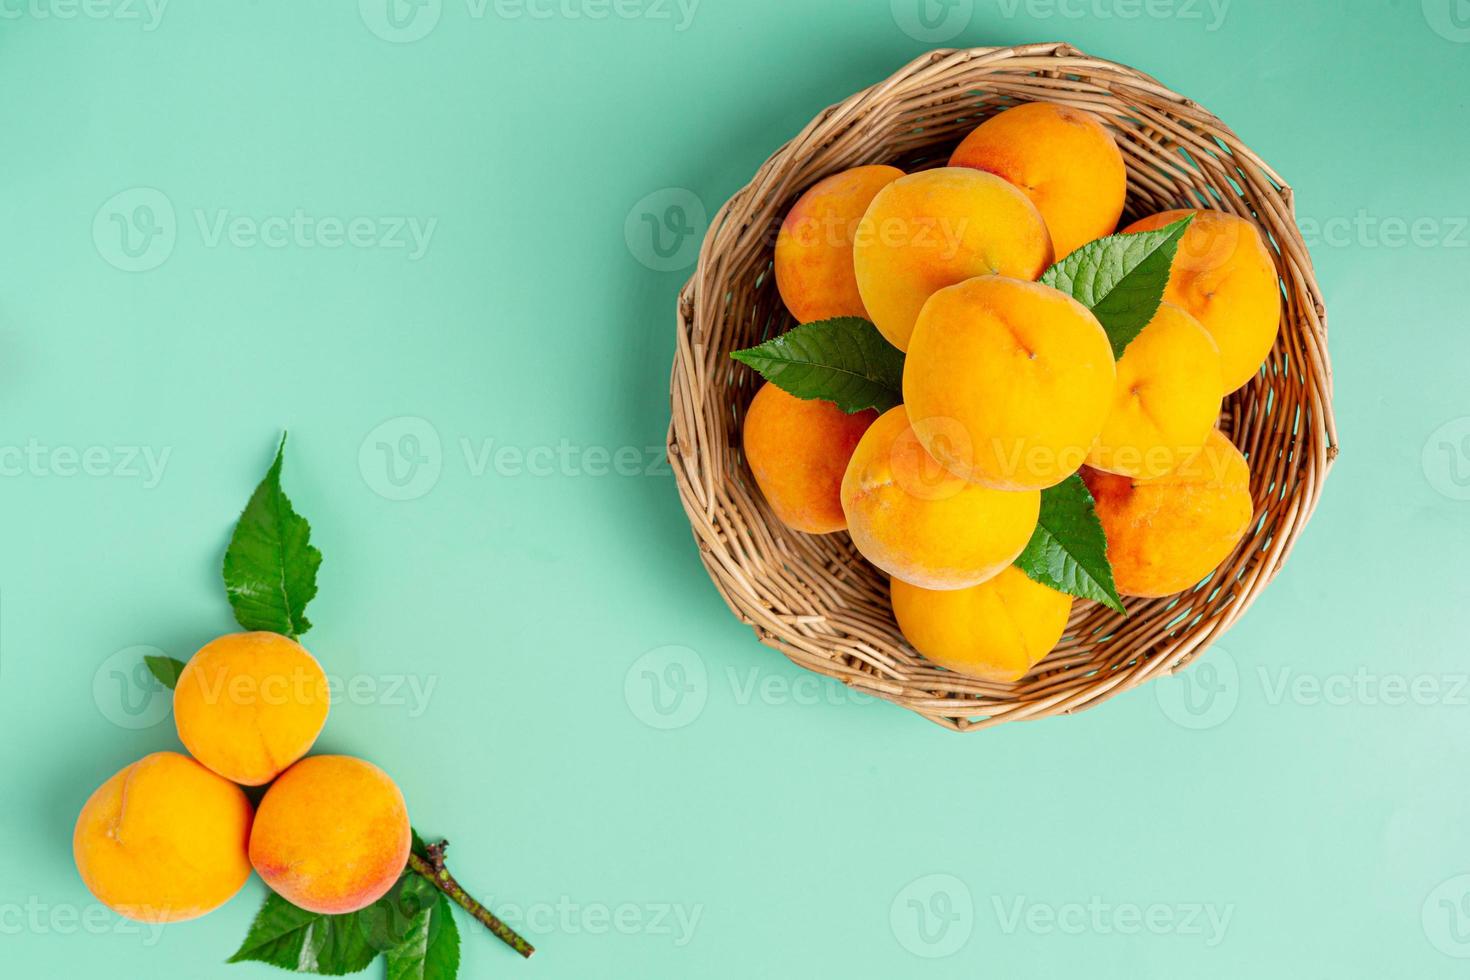 Peaches are placed on a pastel green background. photo